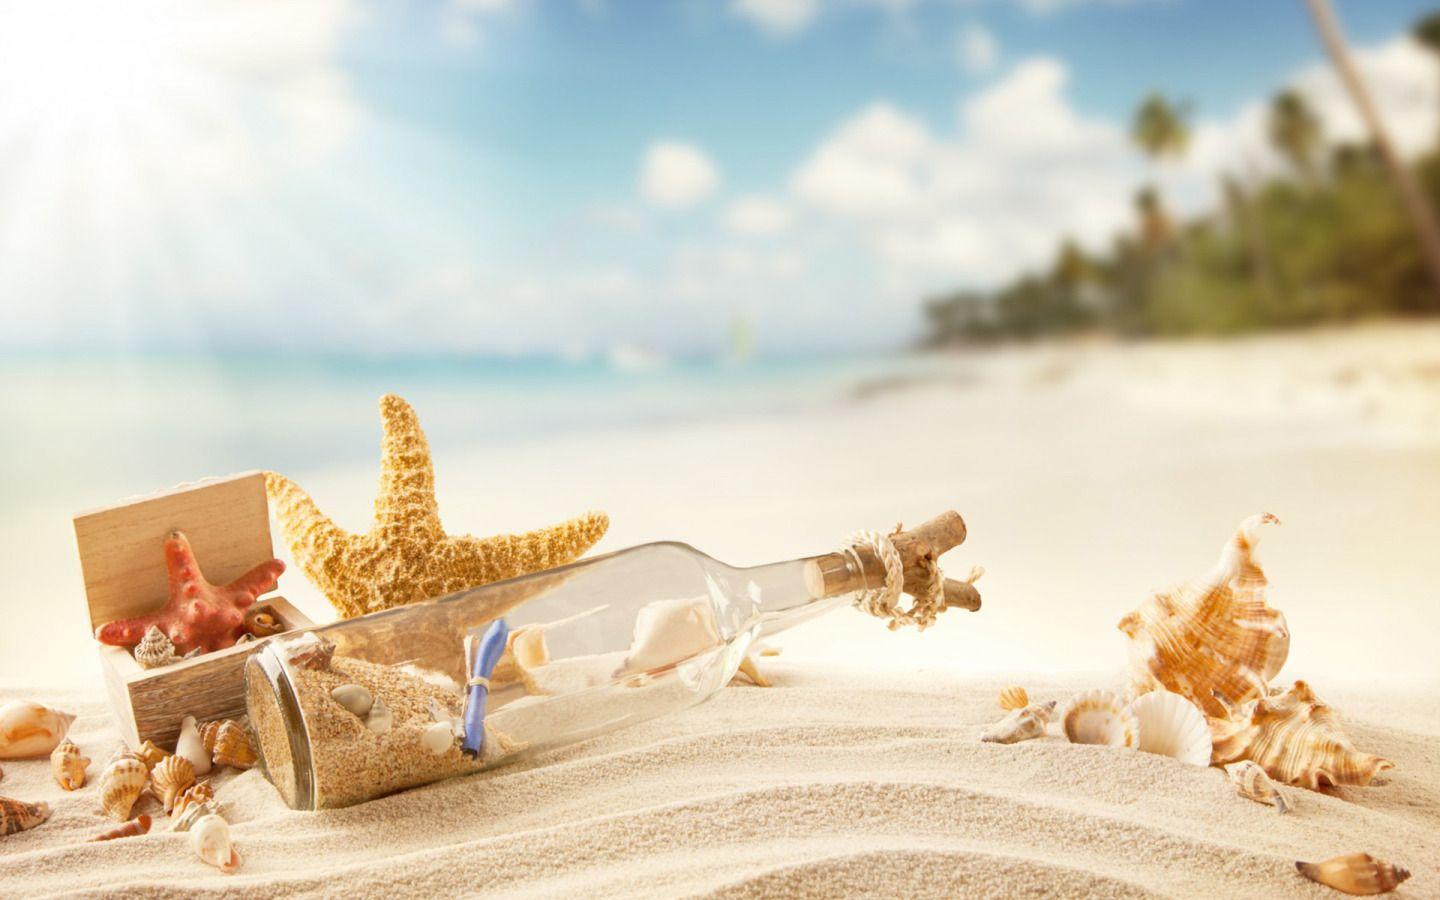 Beach Sea Shell Collection, Bottle, Sand widescreen wallpapers